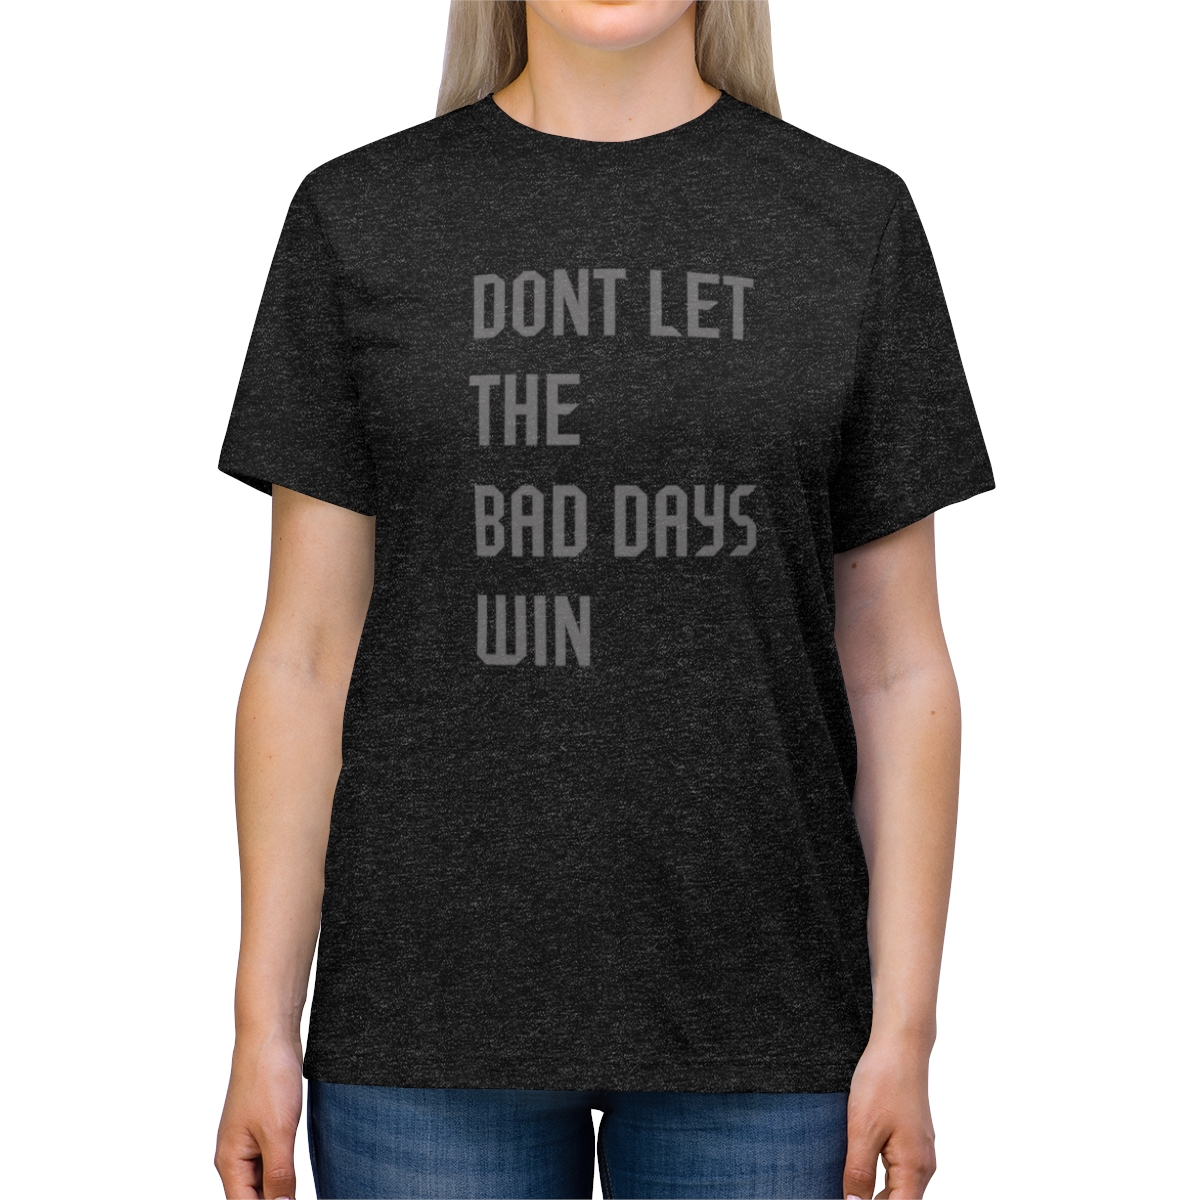 Unisex Triblend Tee "dont let let bad days win" product thumbnail image